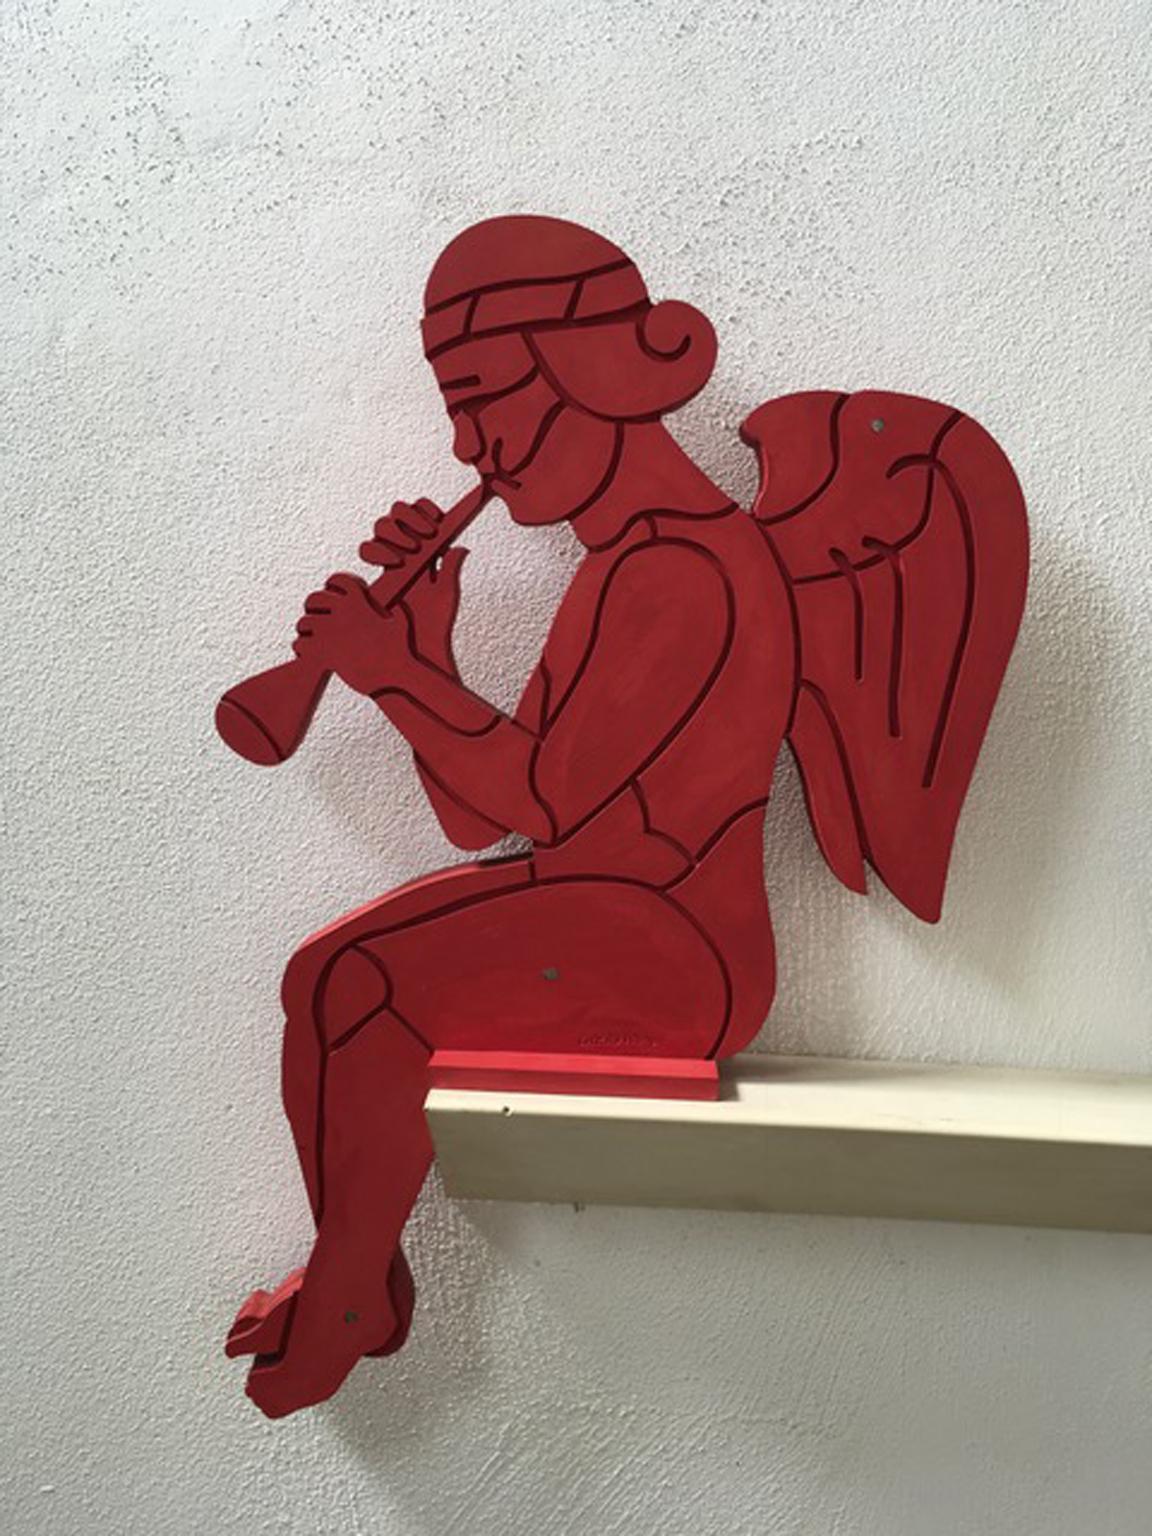 This amazing wall sculpture is an abstract figure in a vibrant hand lacquered red color.
A graphic drawing on the wall like a Pop Art artwork.

Bruno Chersicla Italian artist well known in the Northern part of Italy for these colored wood